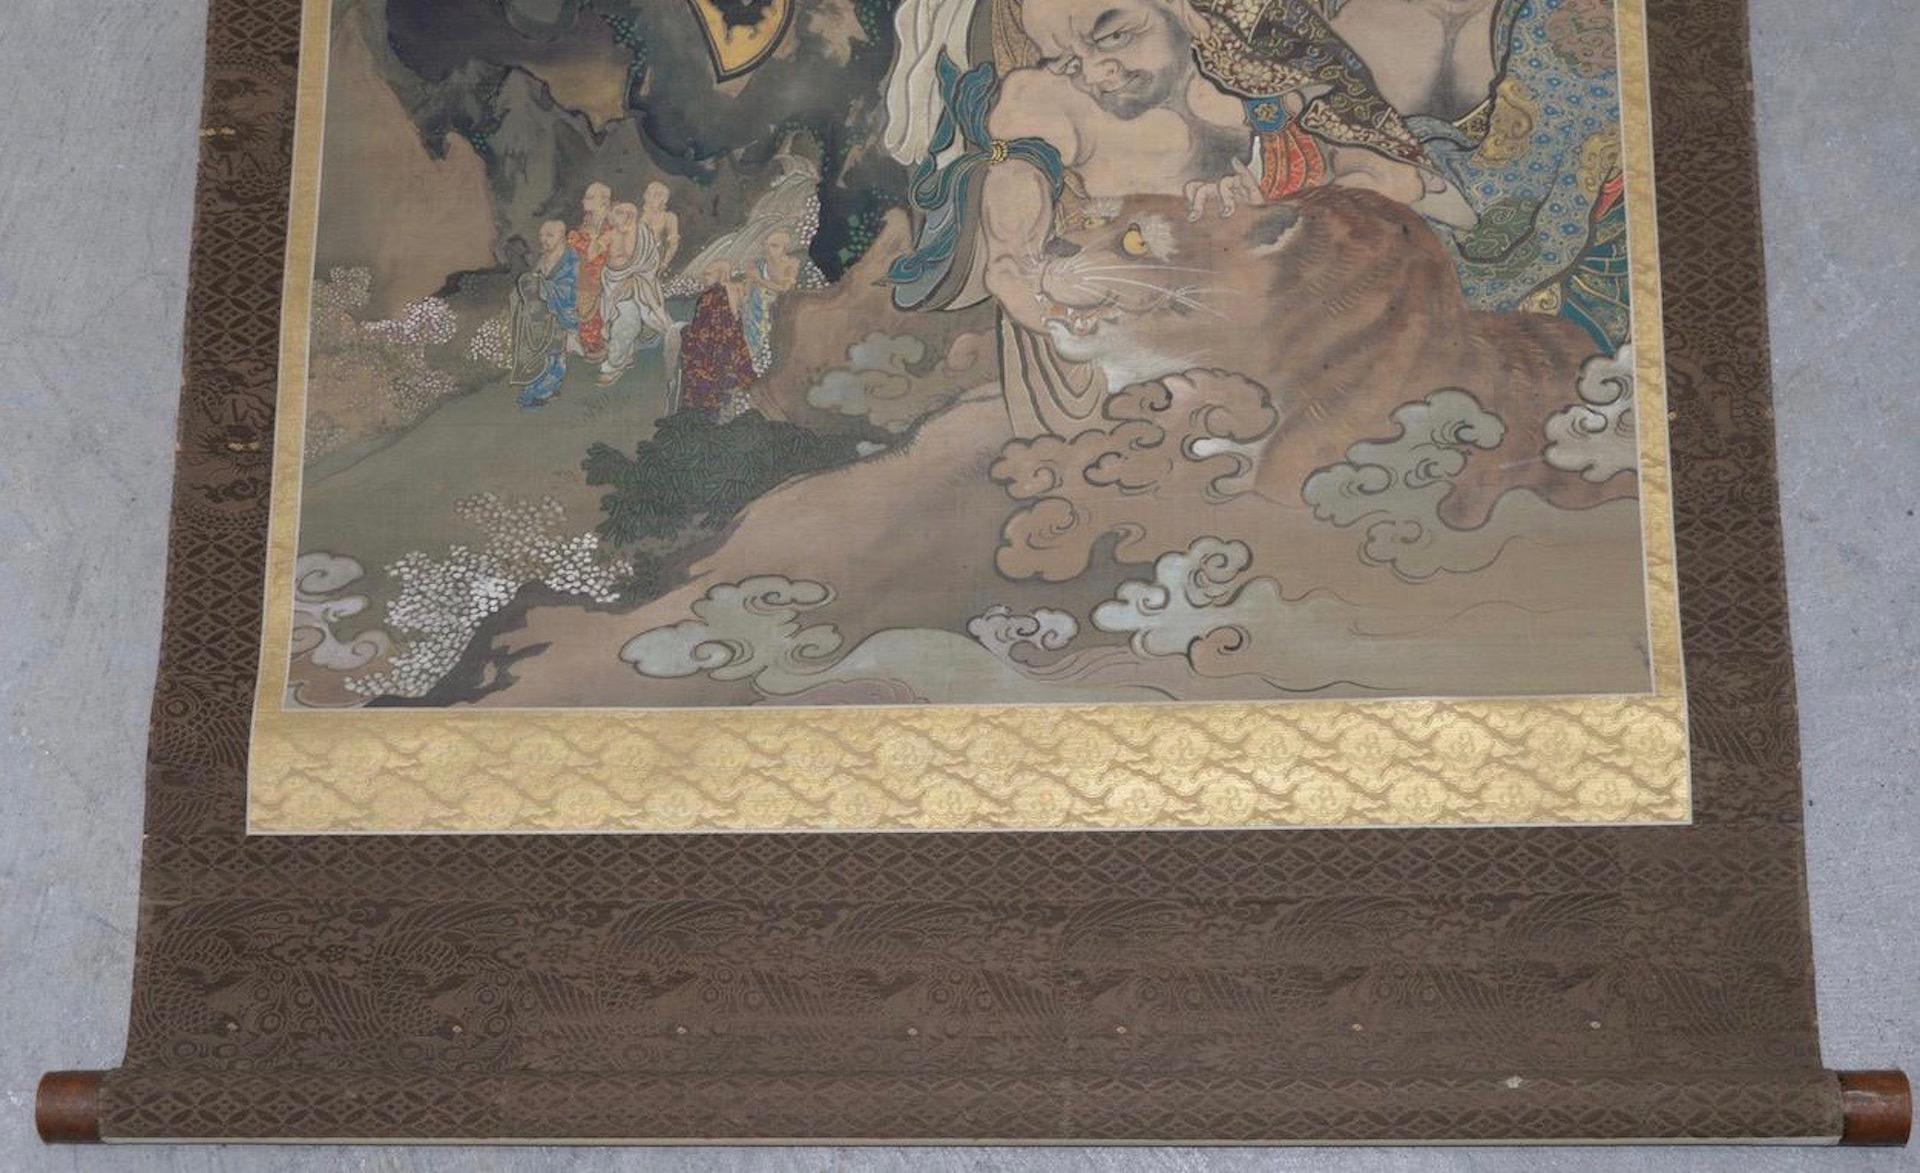 Fine antique Japanese hanging scroll, circa 1910

The scroll depicts Buddha and his disciples (arhats or rakans) and is absolutely beautiful as you can see by the images here.

The scroll measures 40